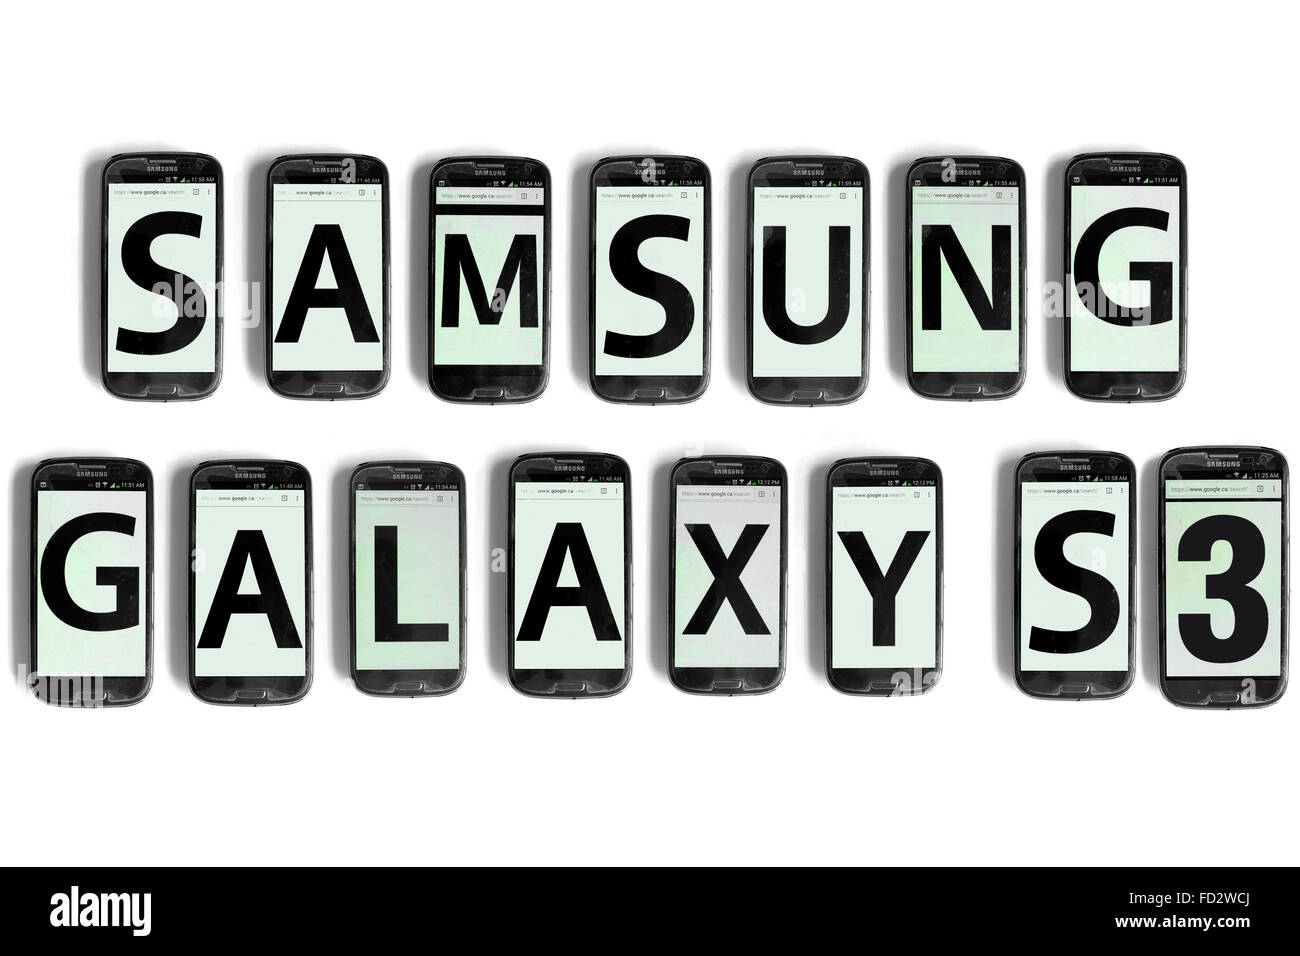 Samsung Galaxy S3 spelled on the screens of smartphones photographed against a white background. Stock Photo